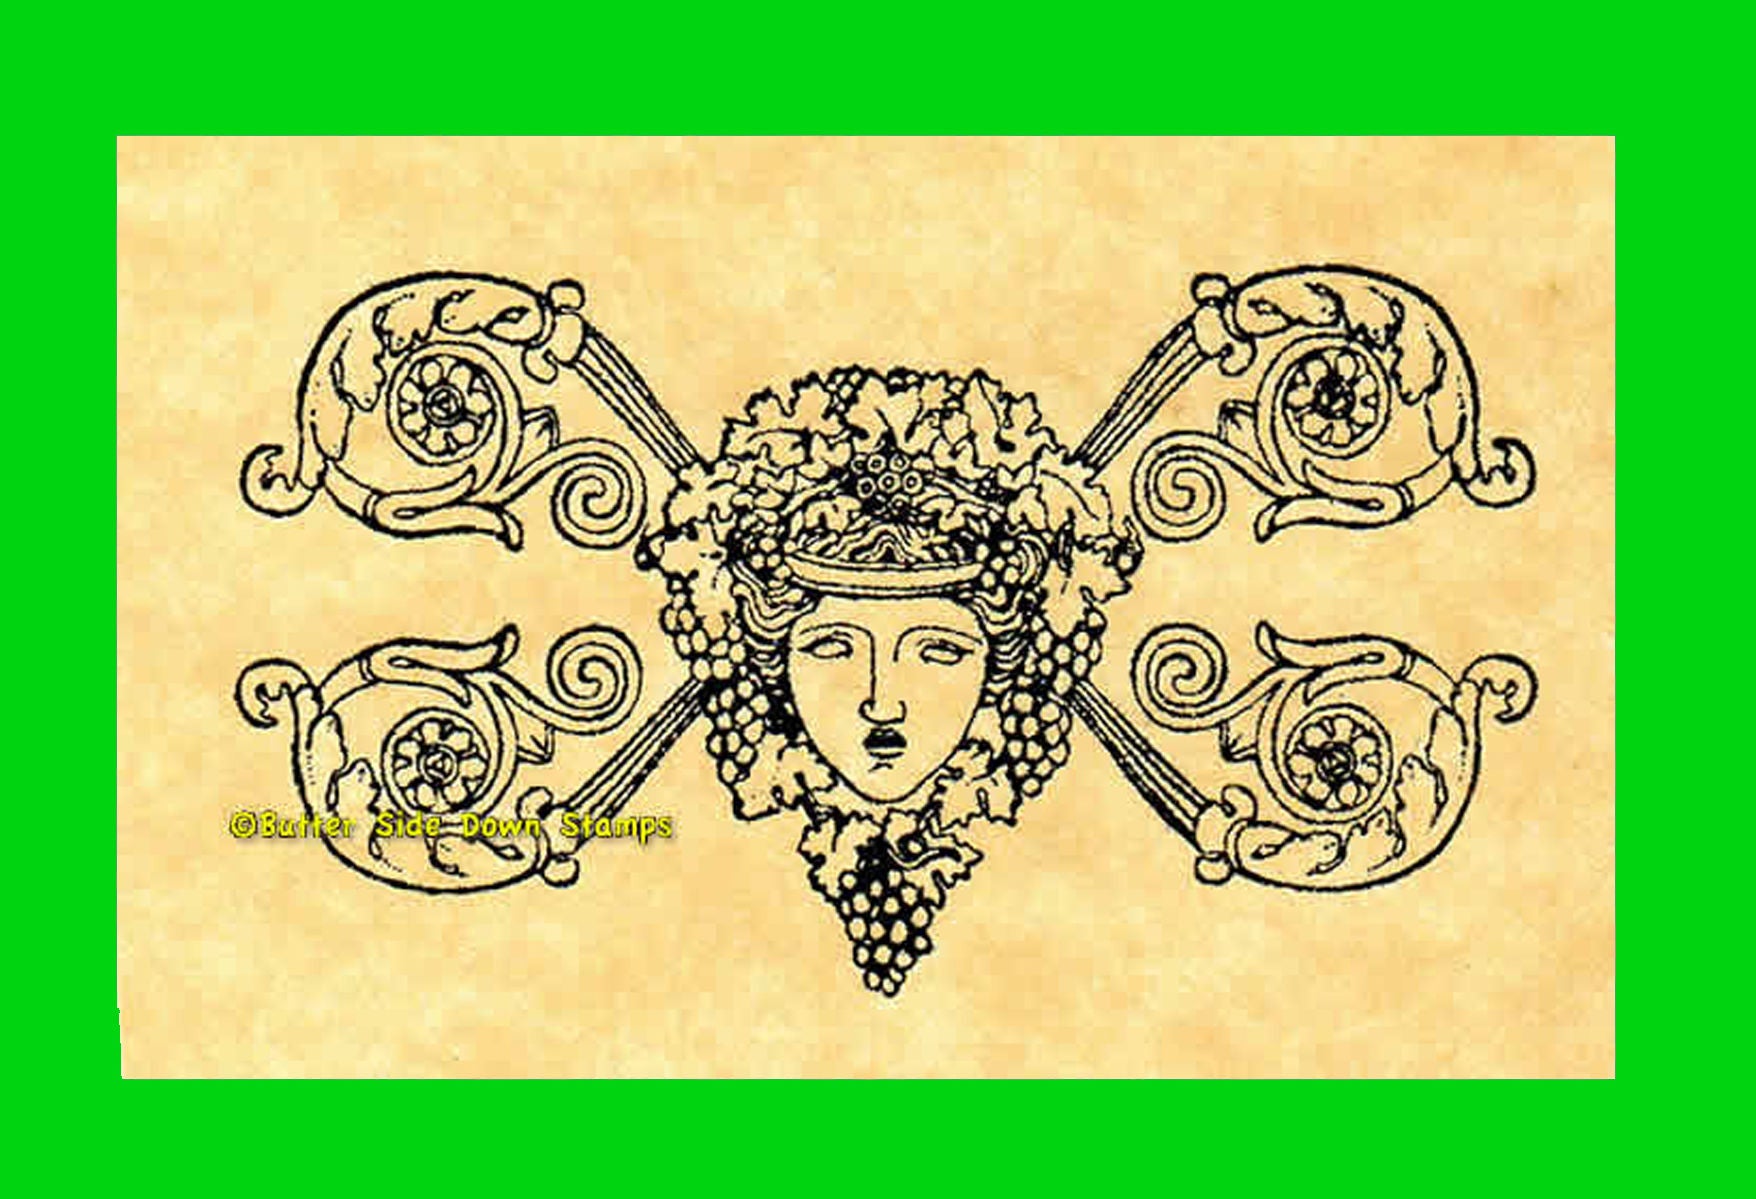 Green woman face with vines and grapes. 